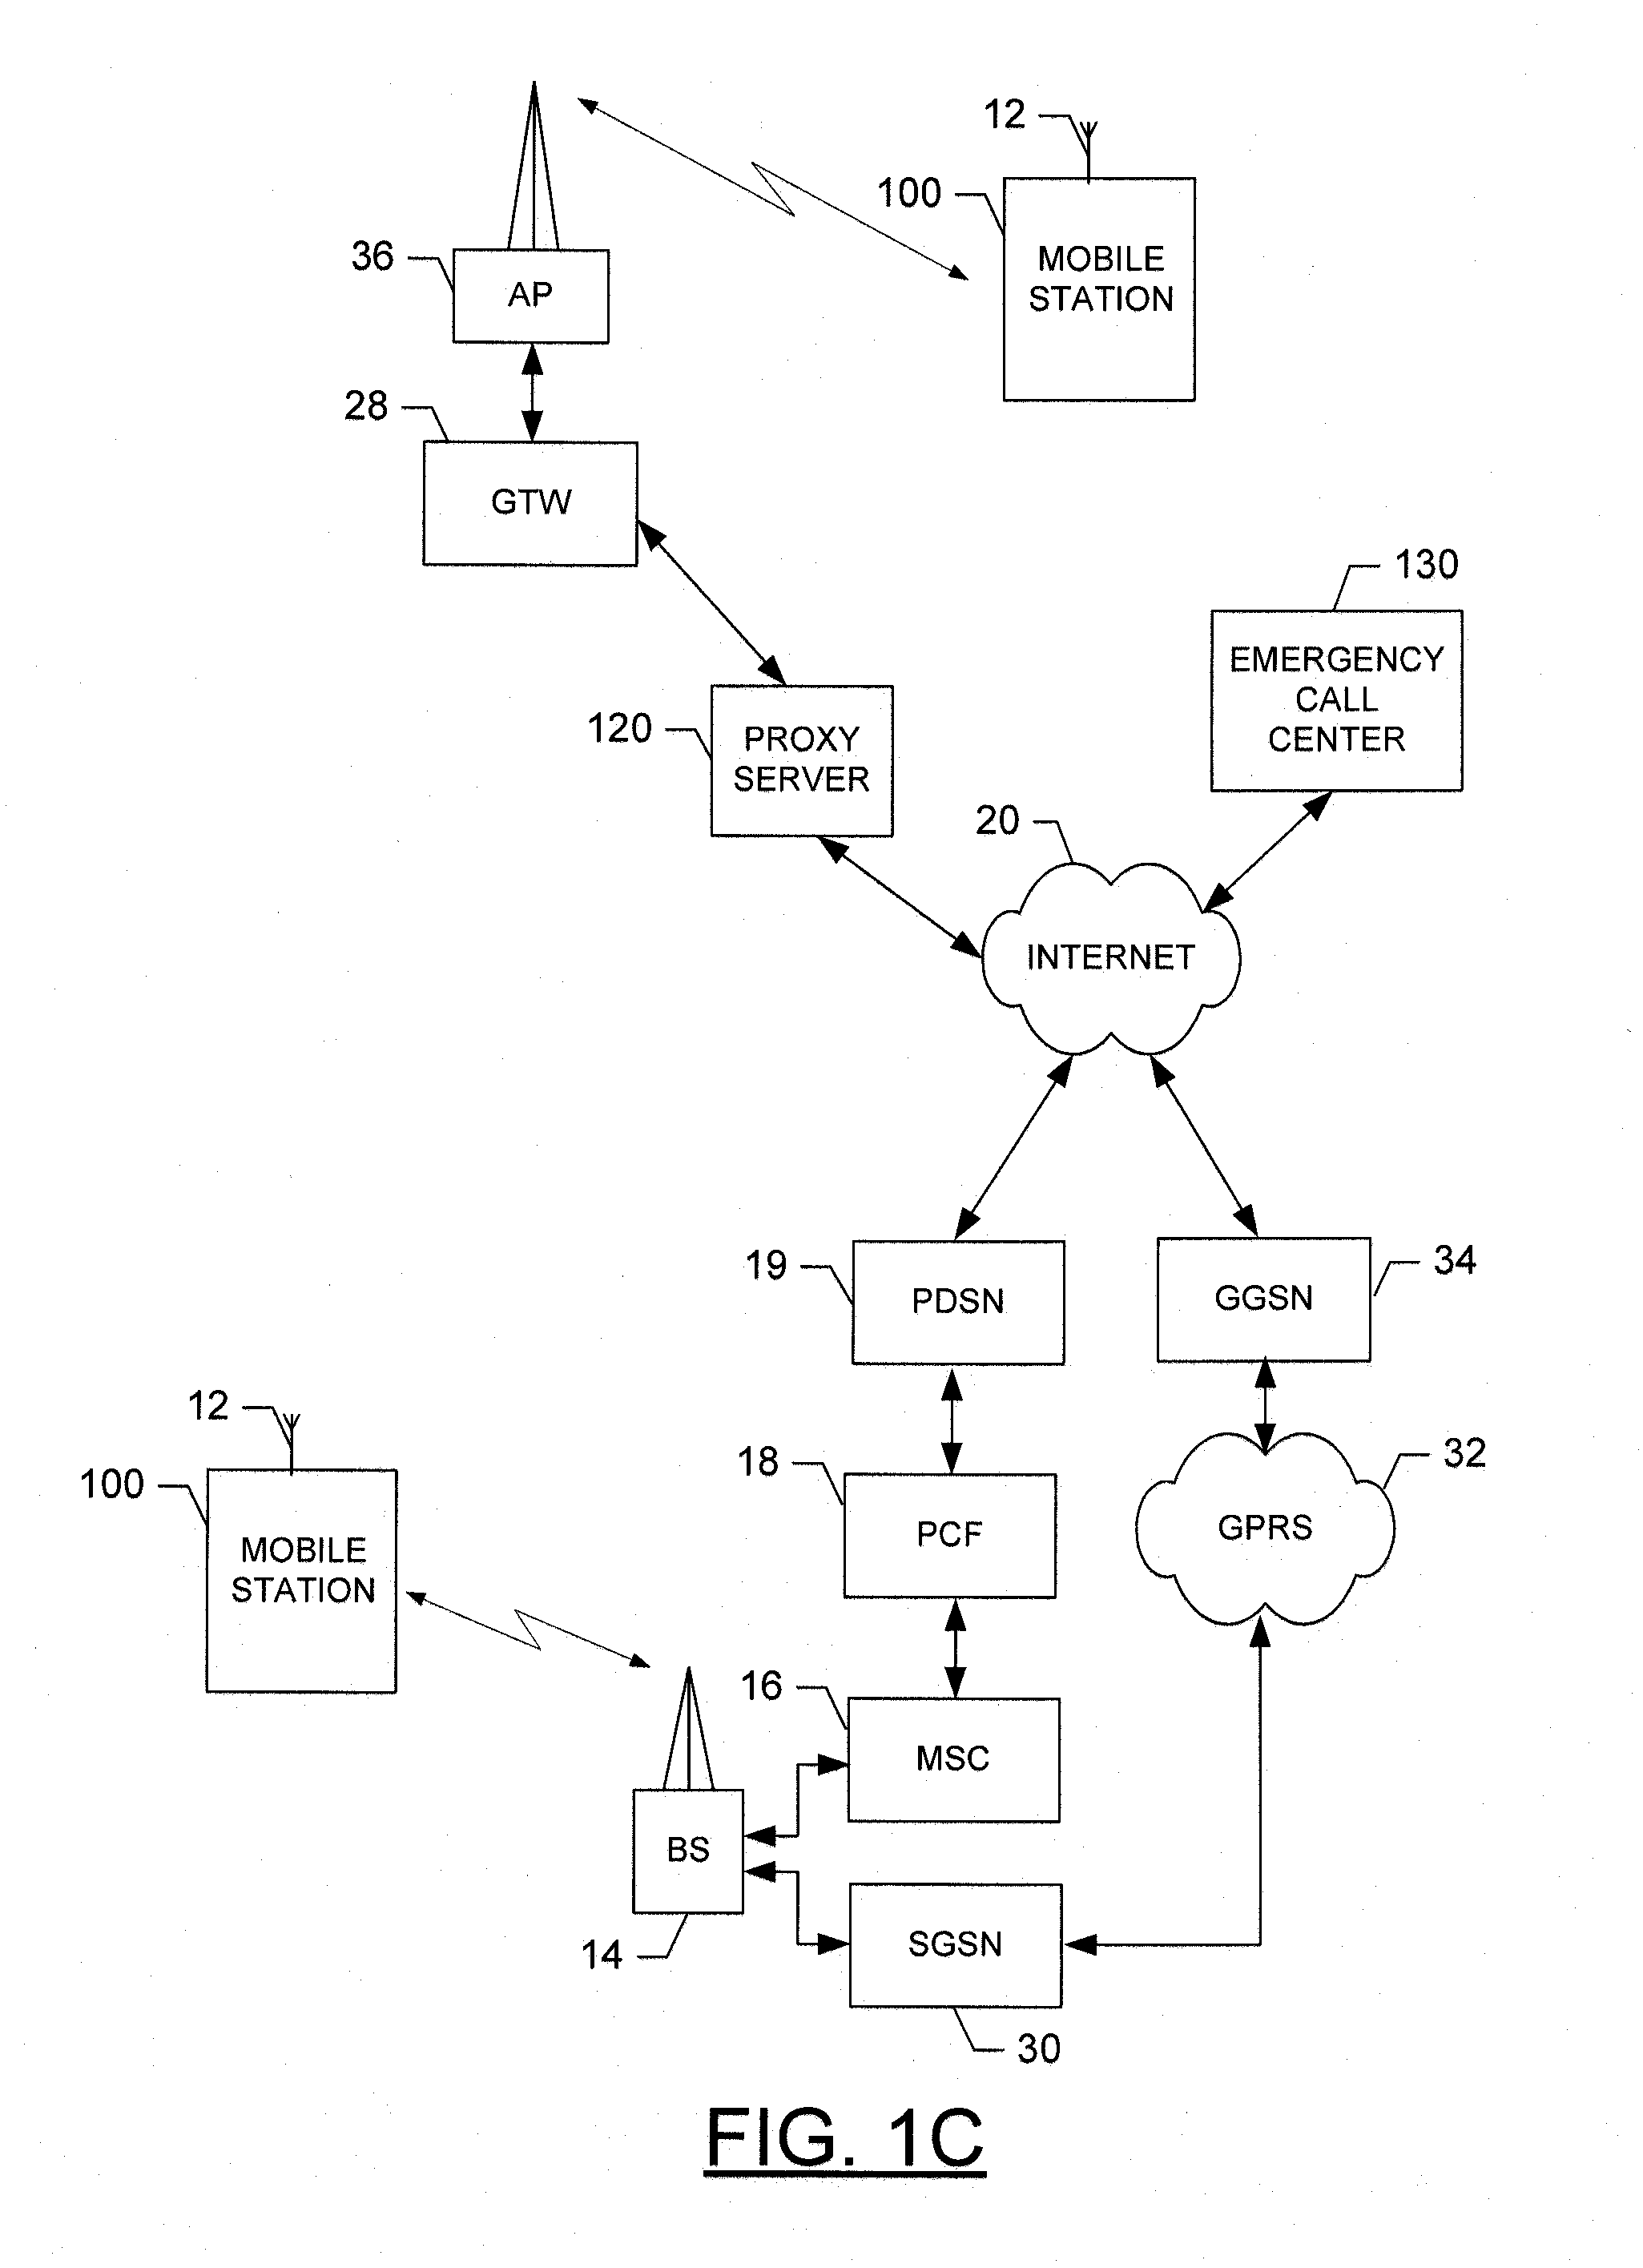 Apparatus, method and computer program product for maintaining emergency calls during mobile device movement